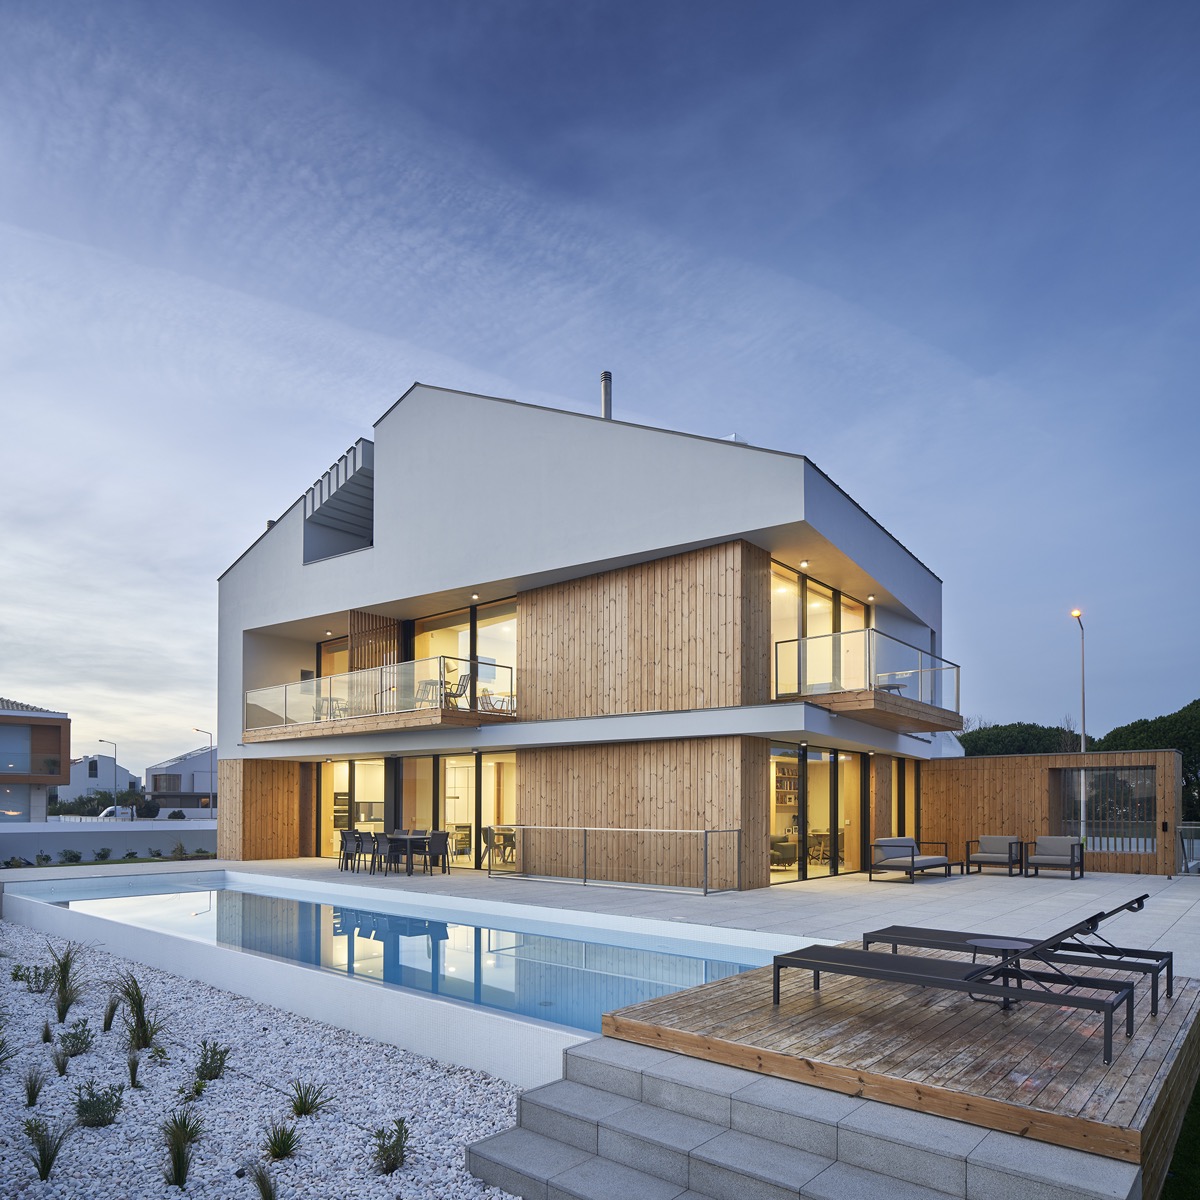 A Modern Pitched Roof House On Portugal’s West Coast [Video]